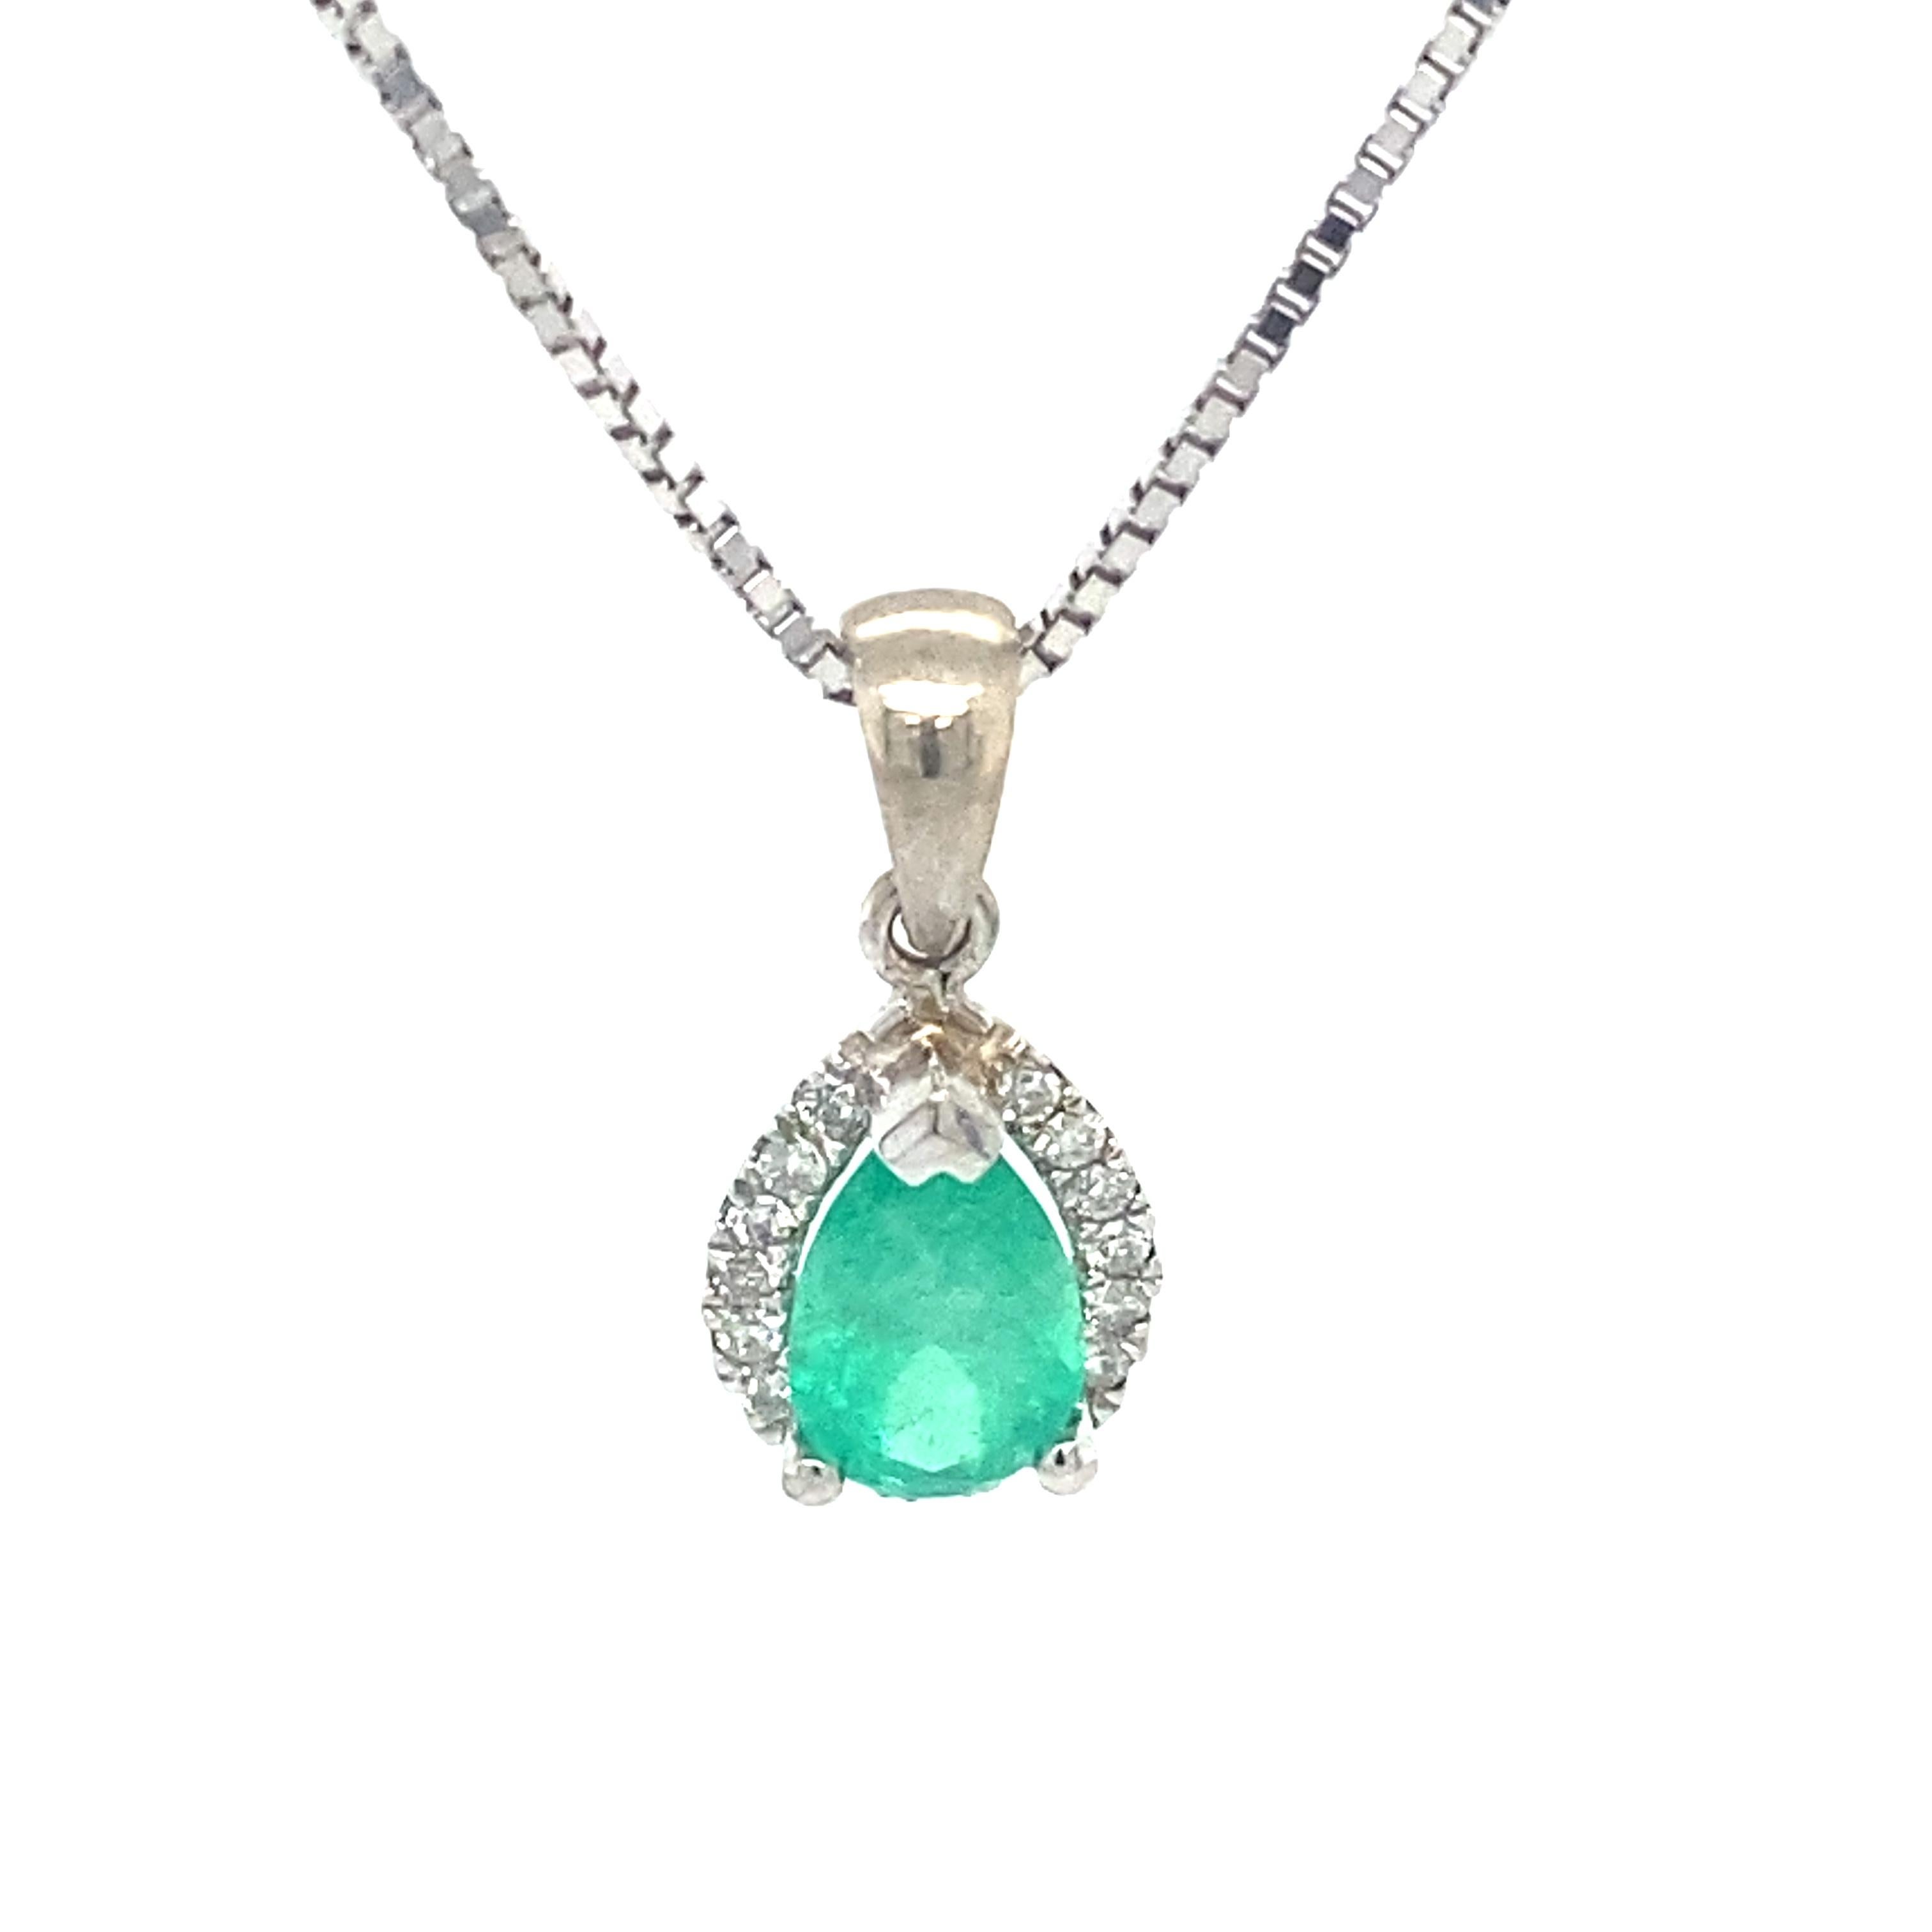 0.88 Carat Pear Cut Emerald and Diamond Pendant Necklace in 14 Karat White Gold For Sale 2